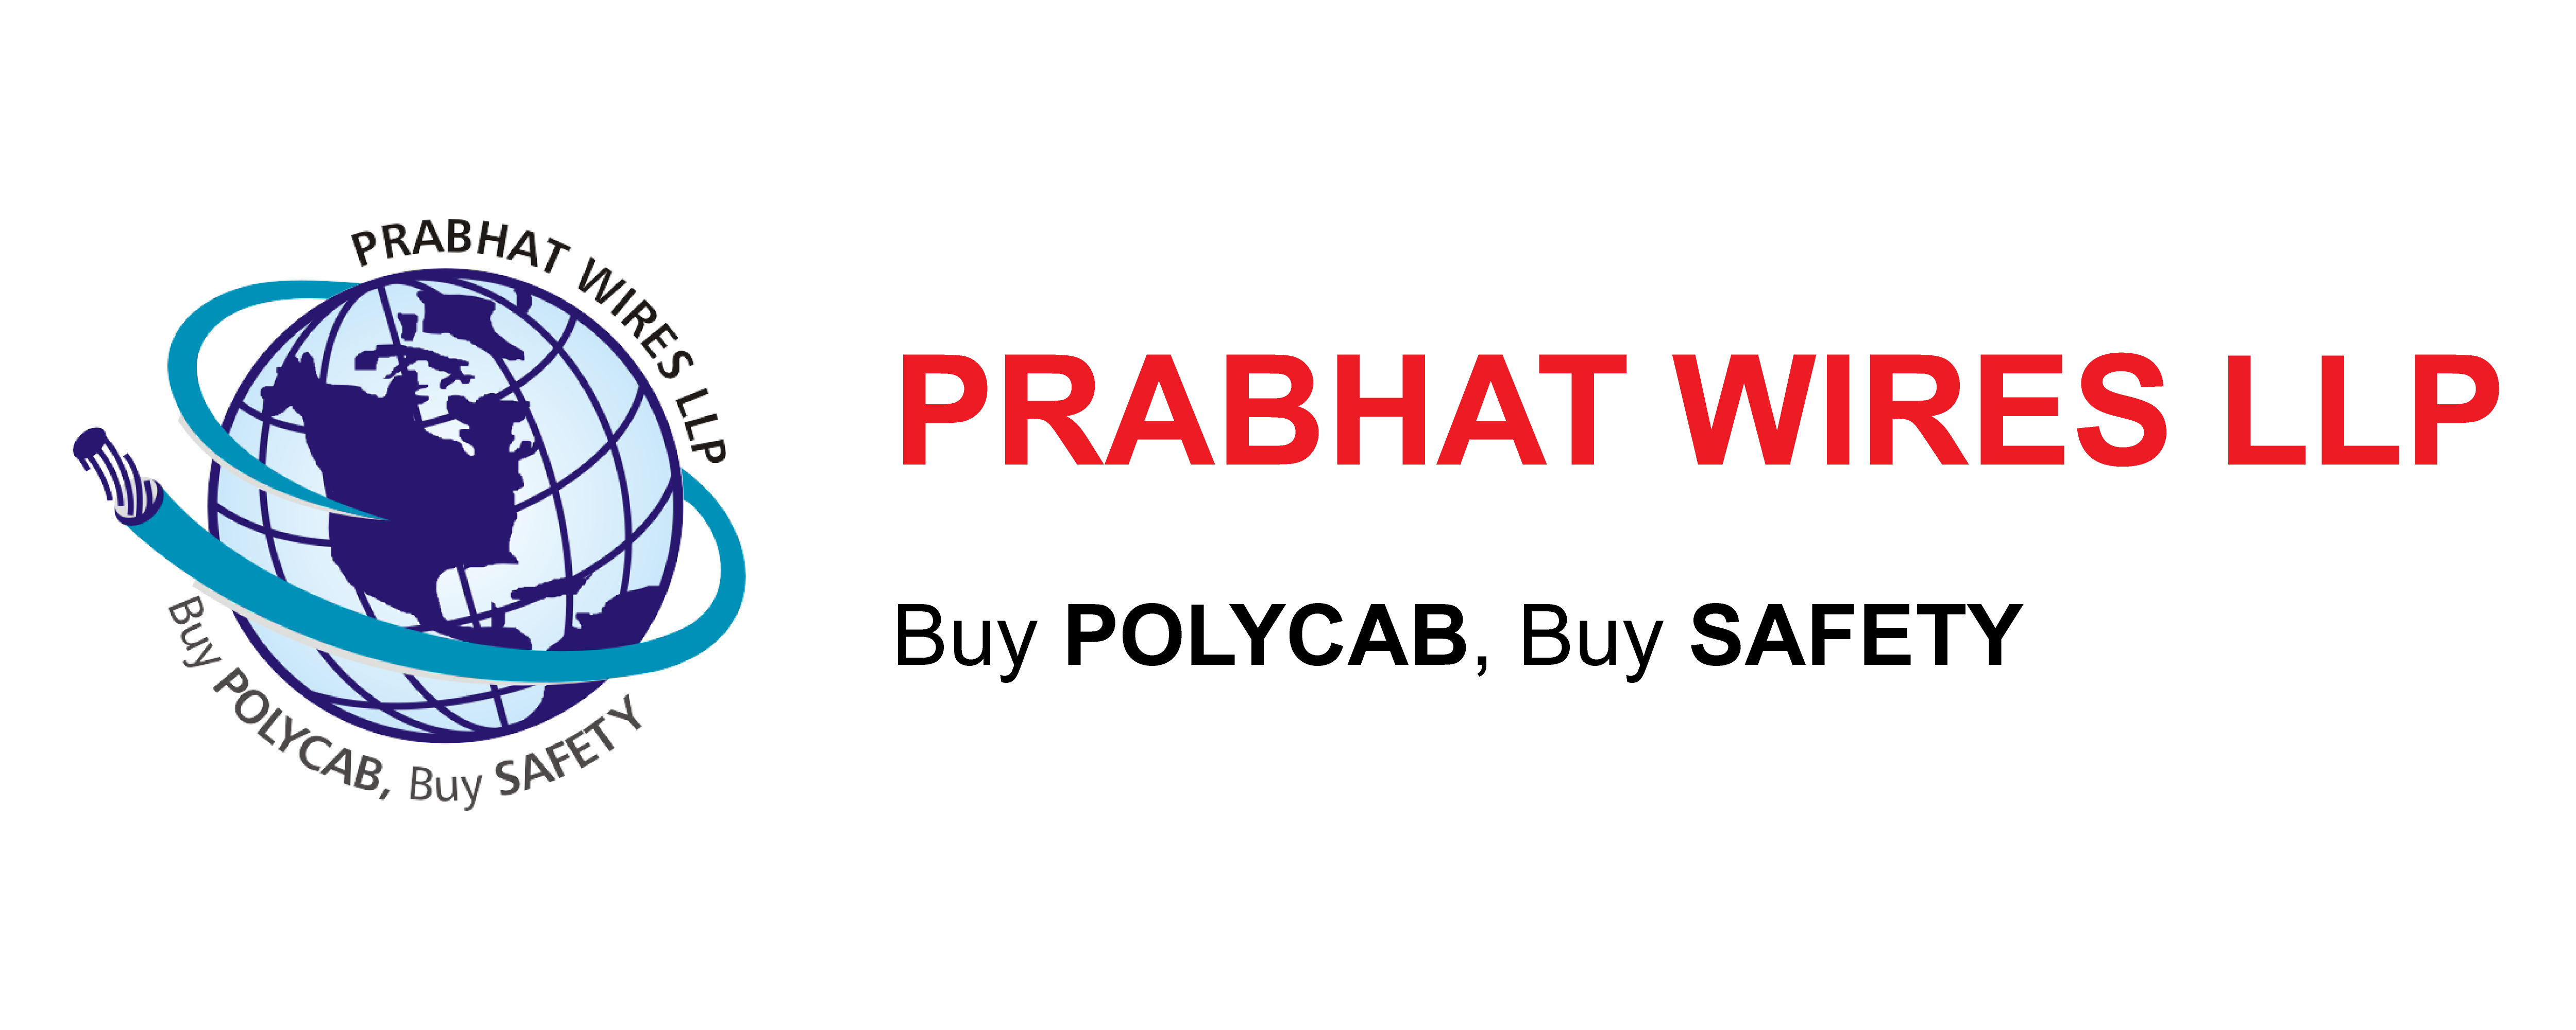 Polycab India says I-T Dept initiated searches at its premises, plants -  The Statesman